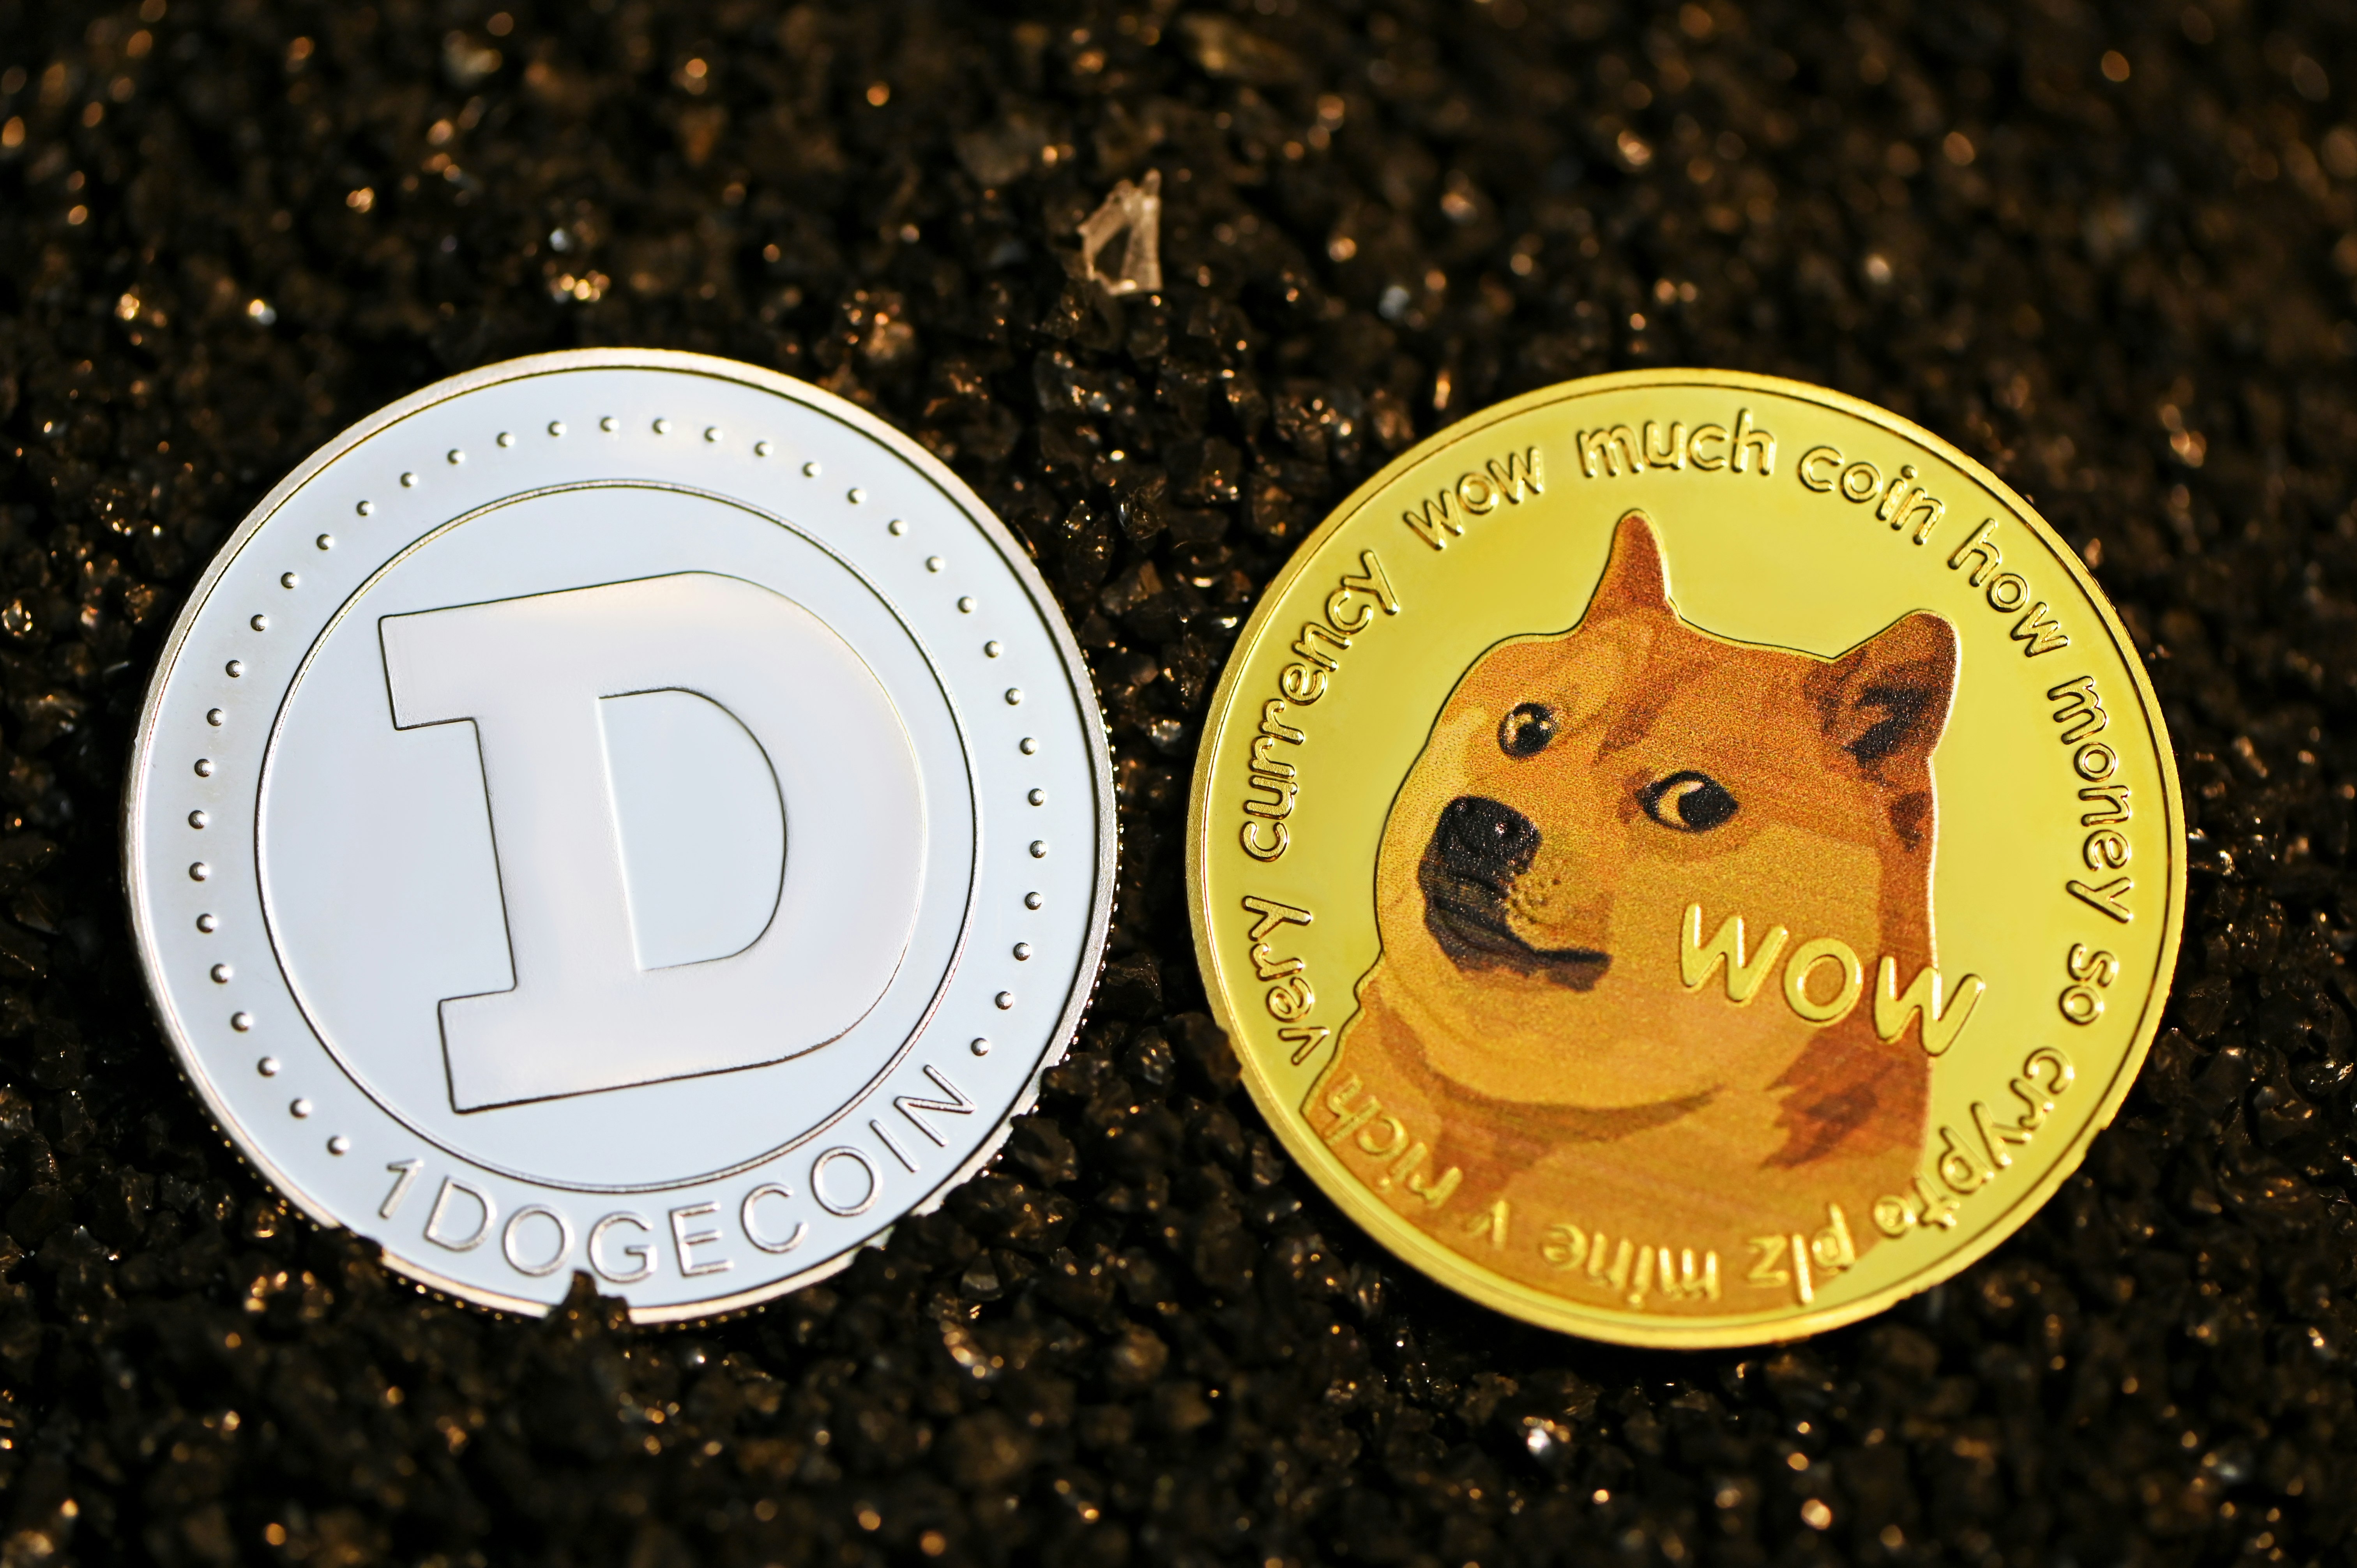 A pair of Dogecoin on black stones.